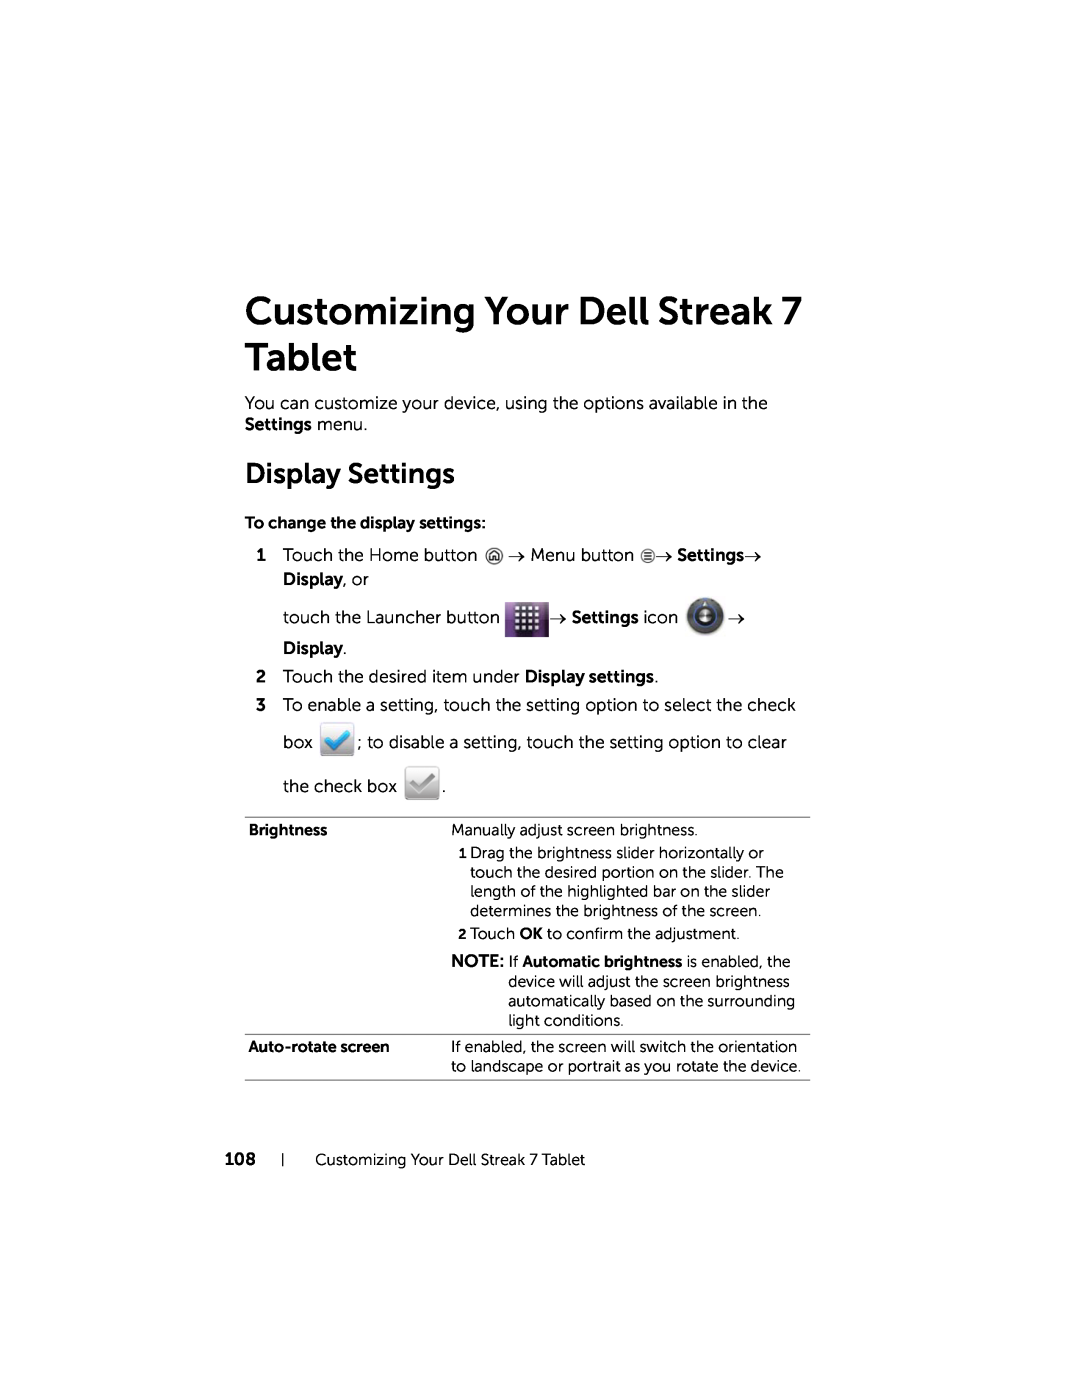 Dell user manual Customizing Your Dell Streak 7 Tablet, Display Settings 